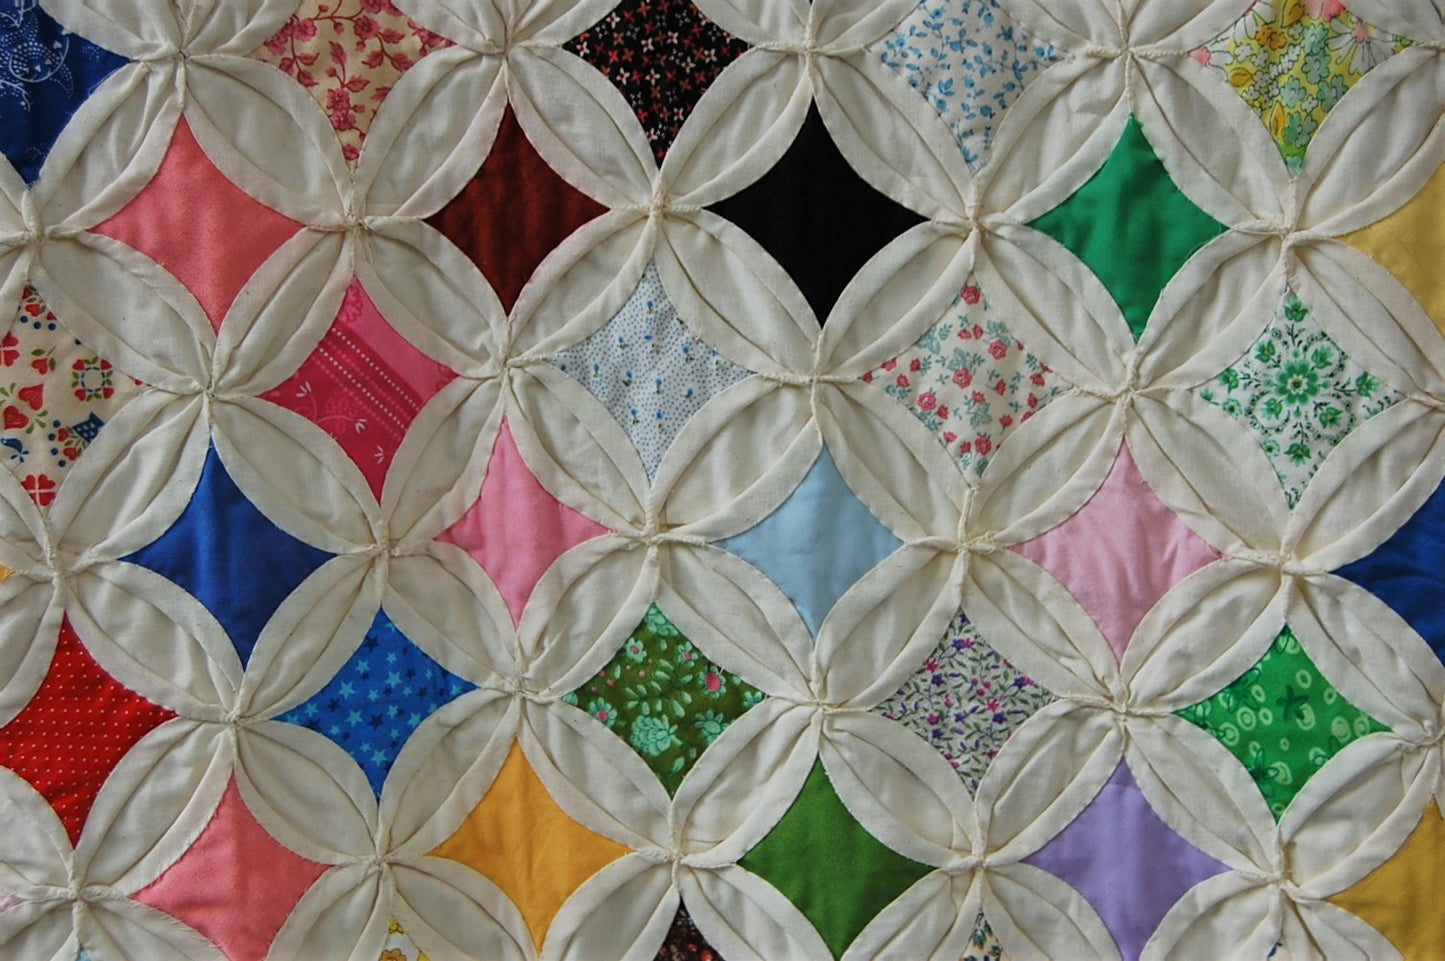 Vintage cathedral windows throw quilt